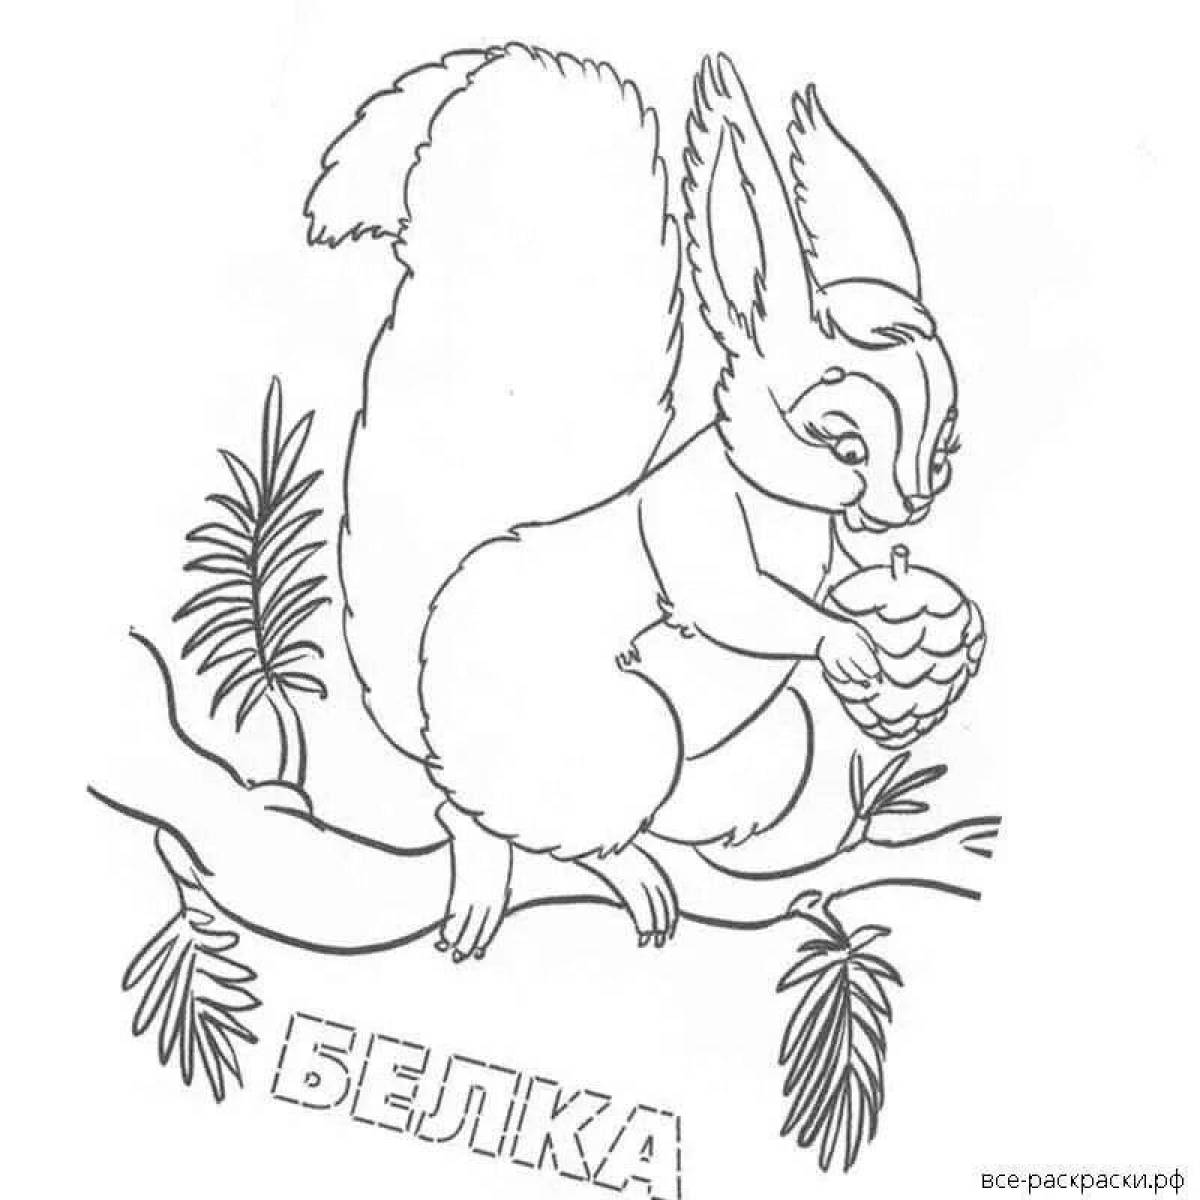 Smiling squirrel coloring page